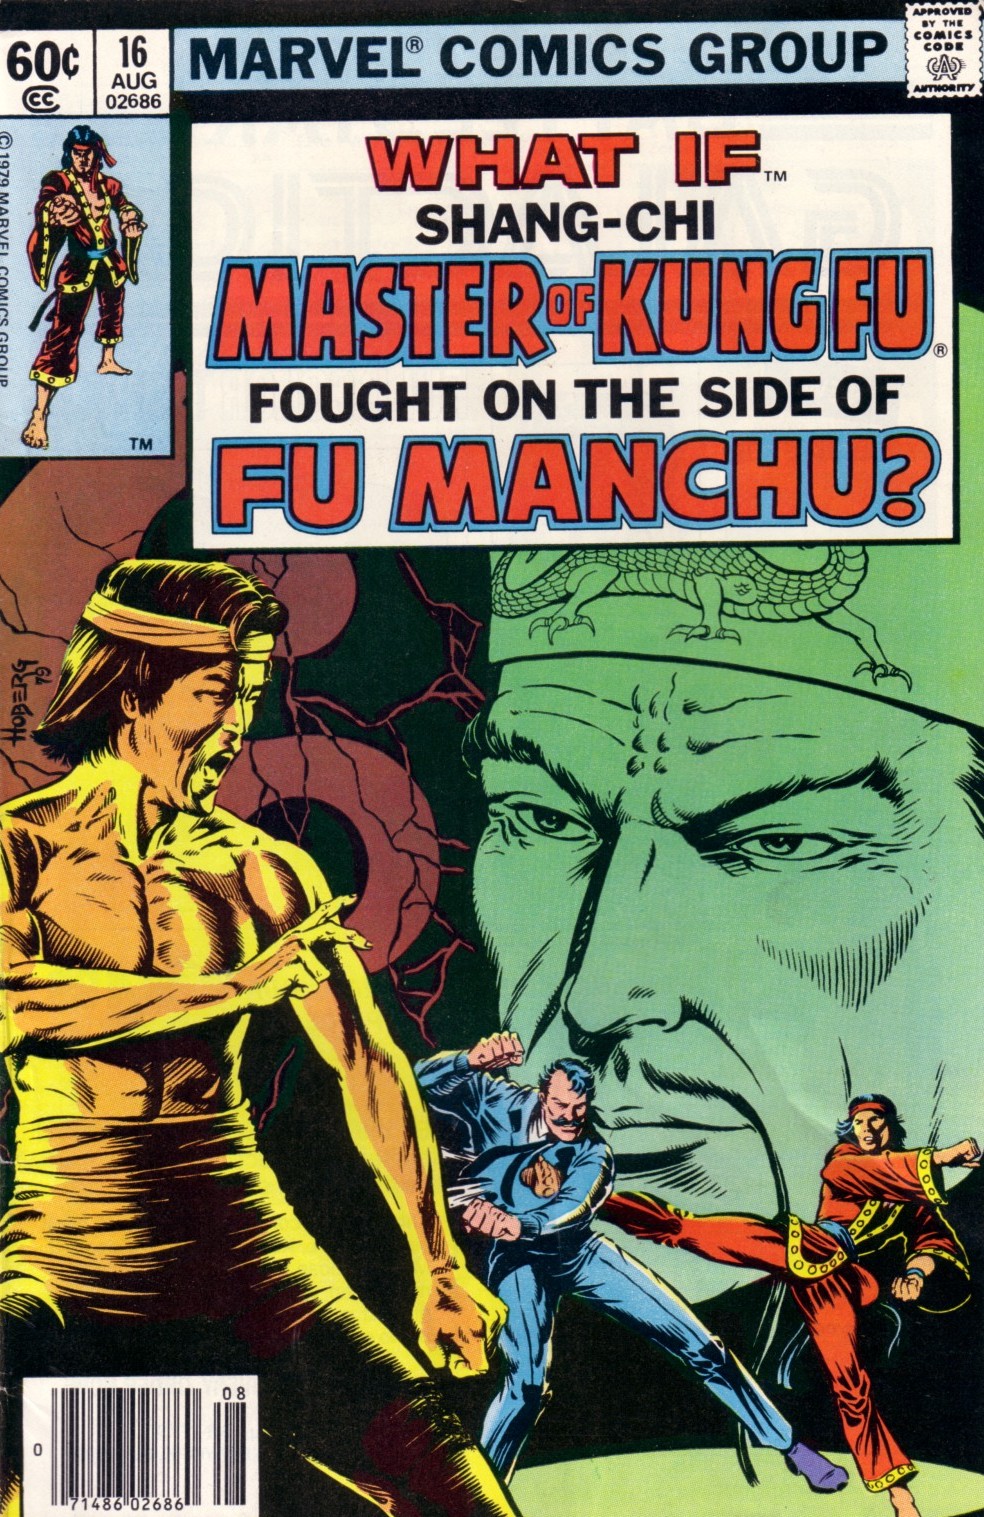 What If? (1977) Issue #16 - Shang Chi Master of Kung Fu fought on The side of Fu Manchu #16 - English 1